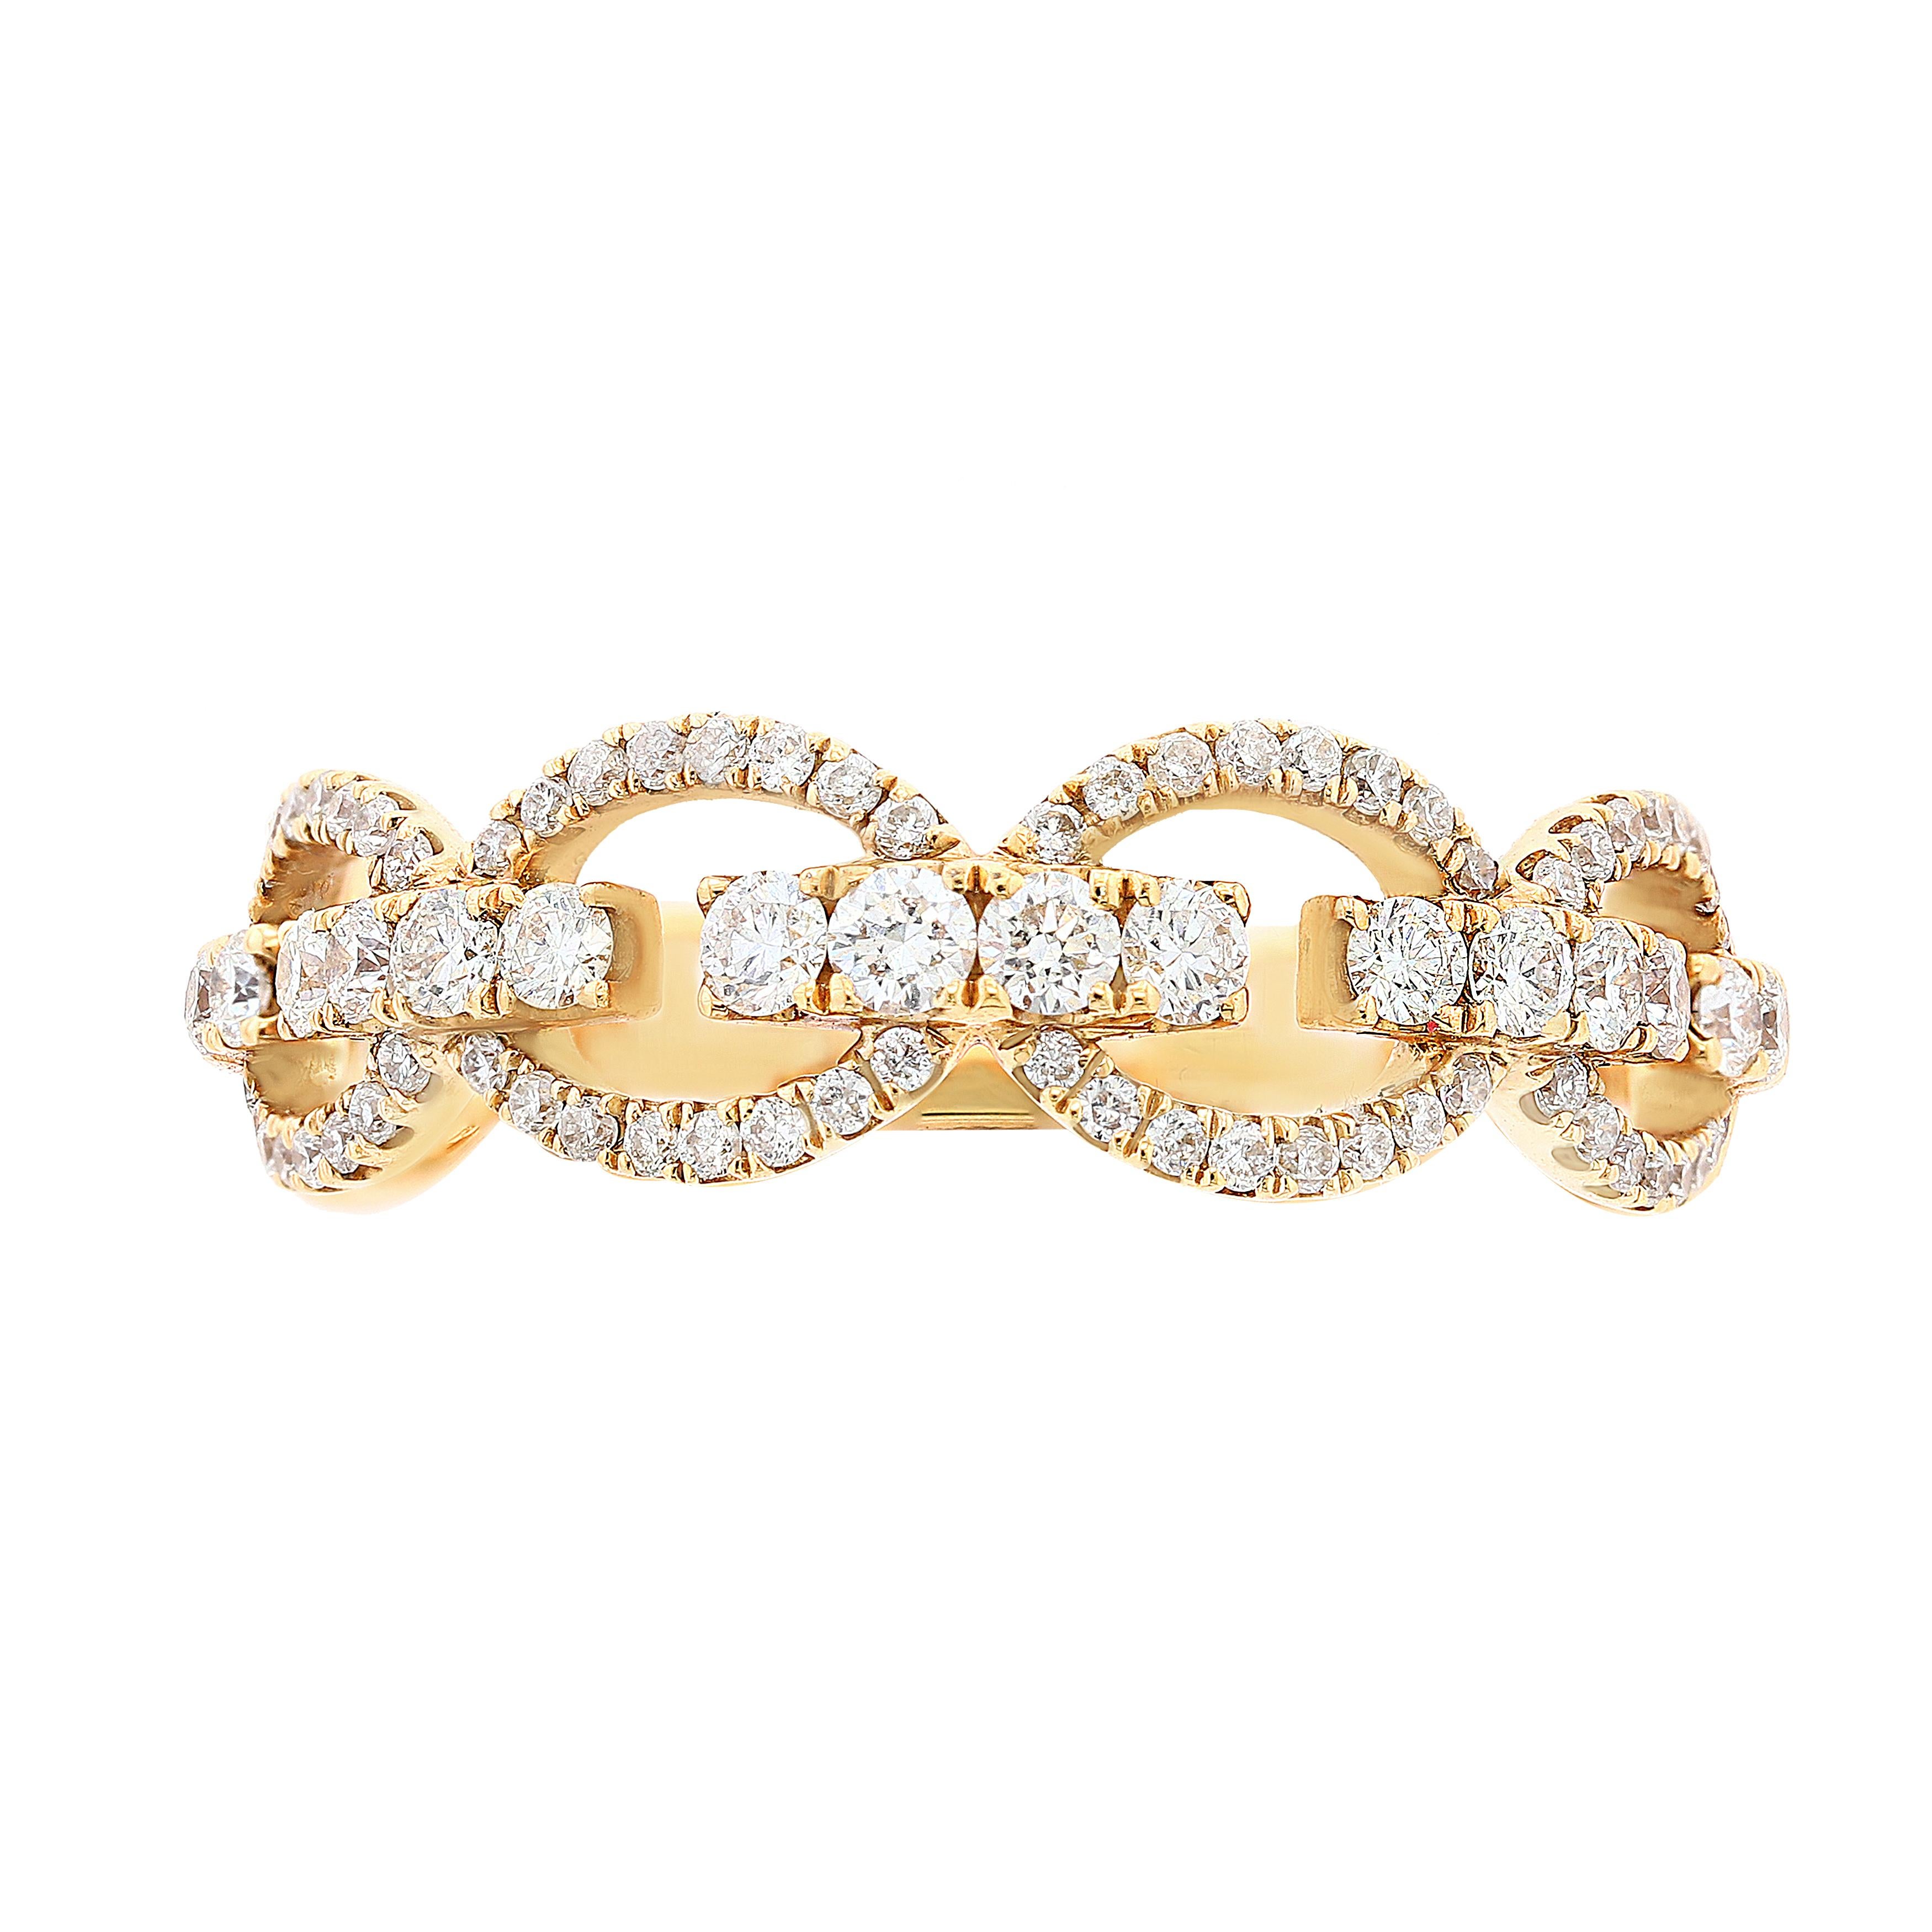  Round brilliant diamonds in a creative open-work design. Diamonds weigh 0.51 Carats total. Made in 18K Yellow Gold.  Size 6.5 US (Sizable).
All diamonds are GH color- SI1 clarity.
Avaialble in white and rose gold too.